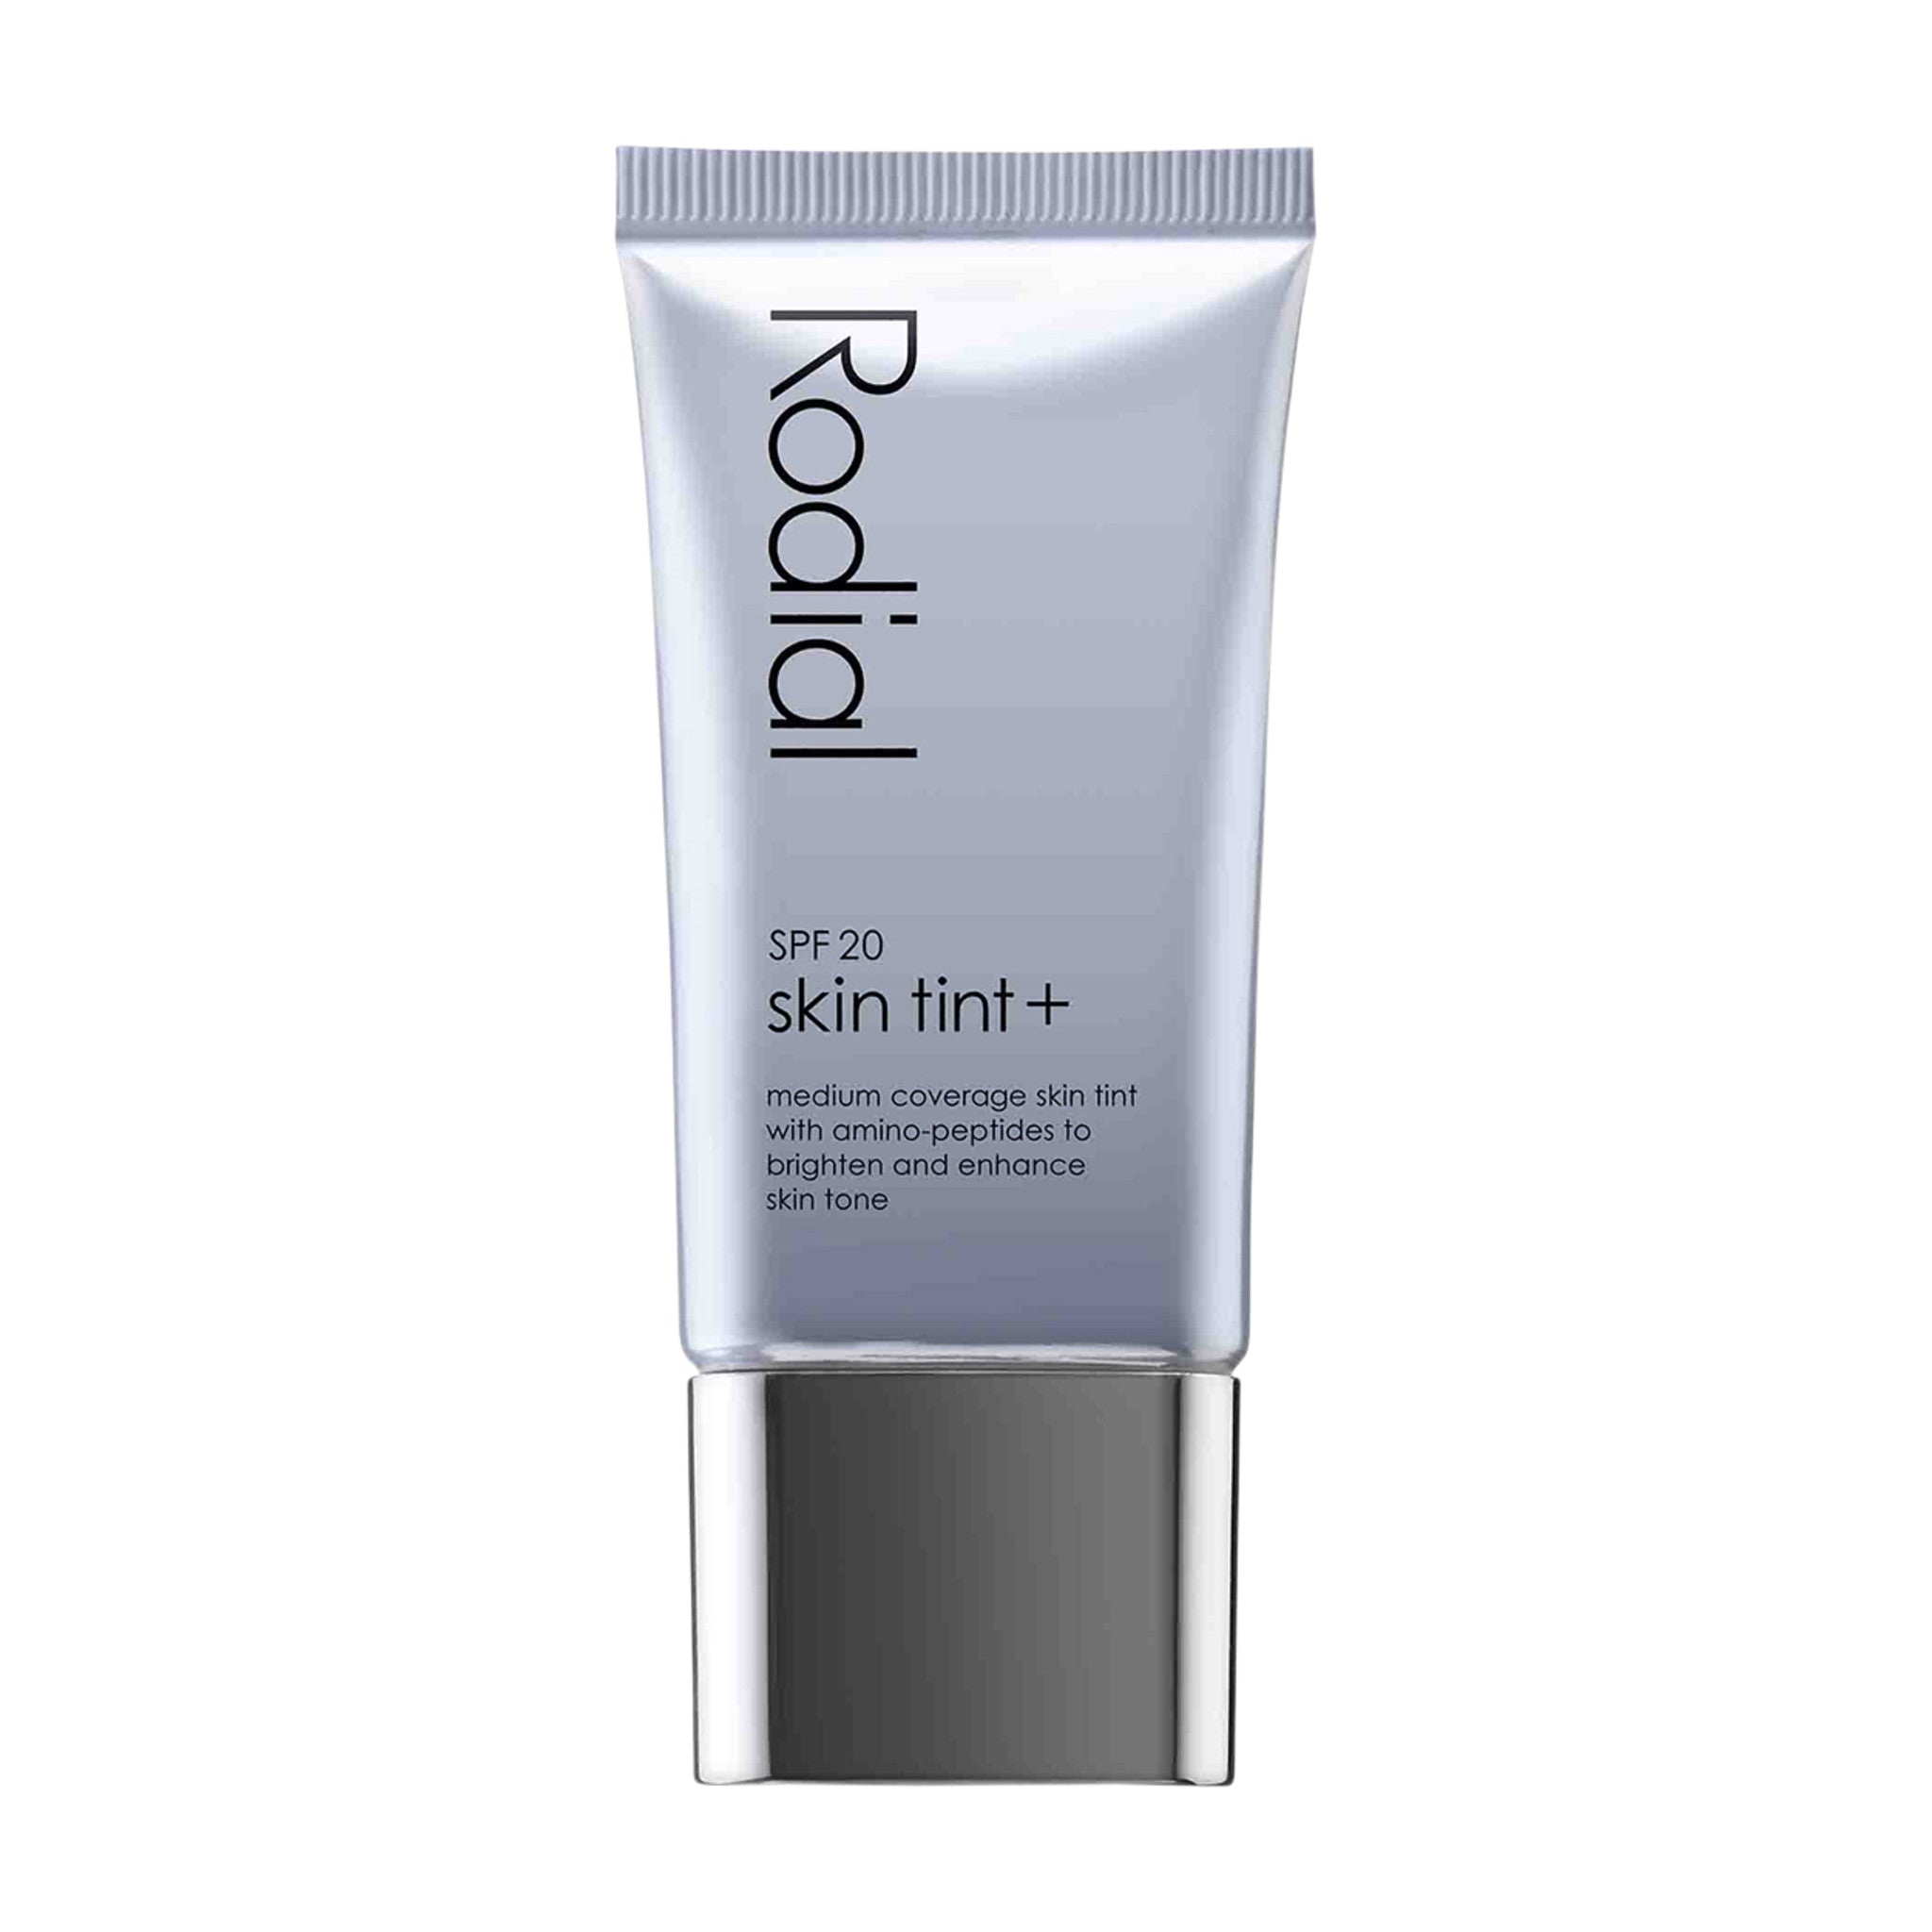 Rodial Skin Tint SPF 20 Color/Shade variant: Capri main image. This product is for light cool neutral beige complexions